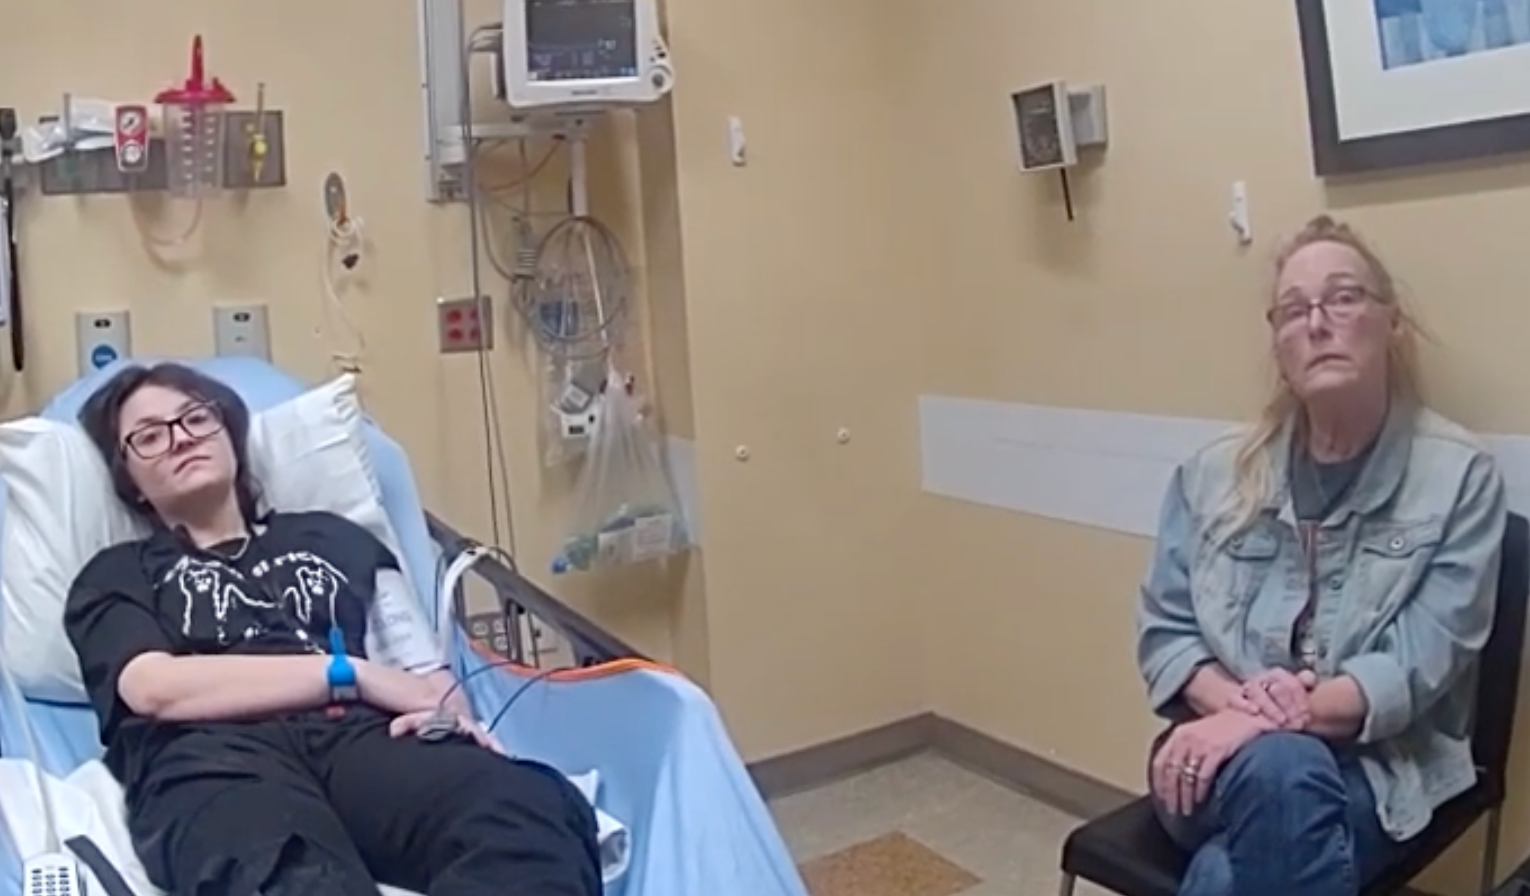 Nex Benedict, left, and their mother Sue Benedict, shown on police body cam being interviewed in hospital on 7 February